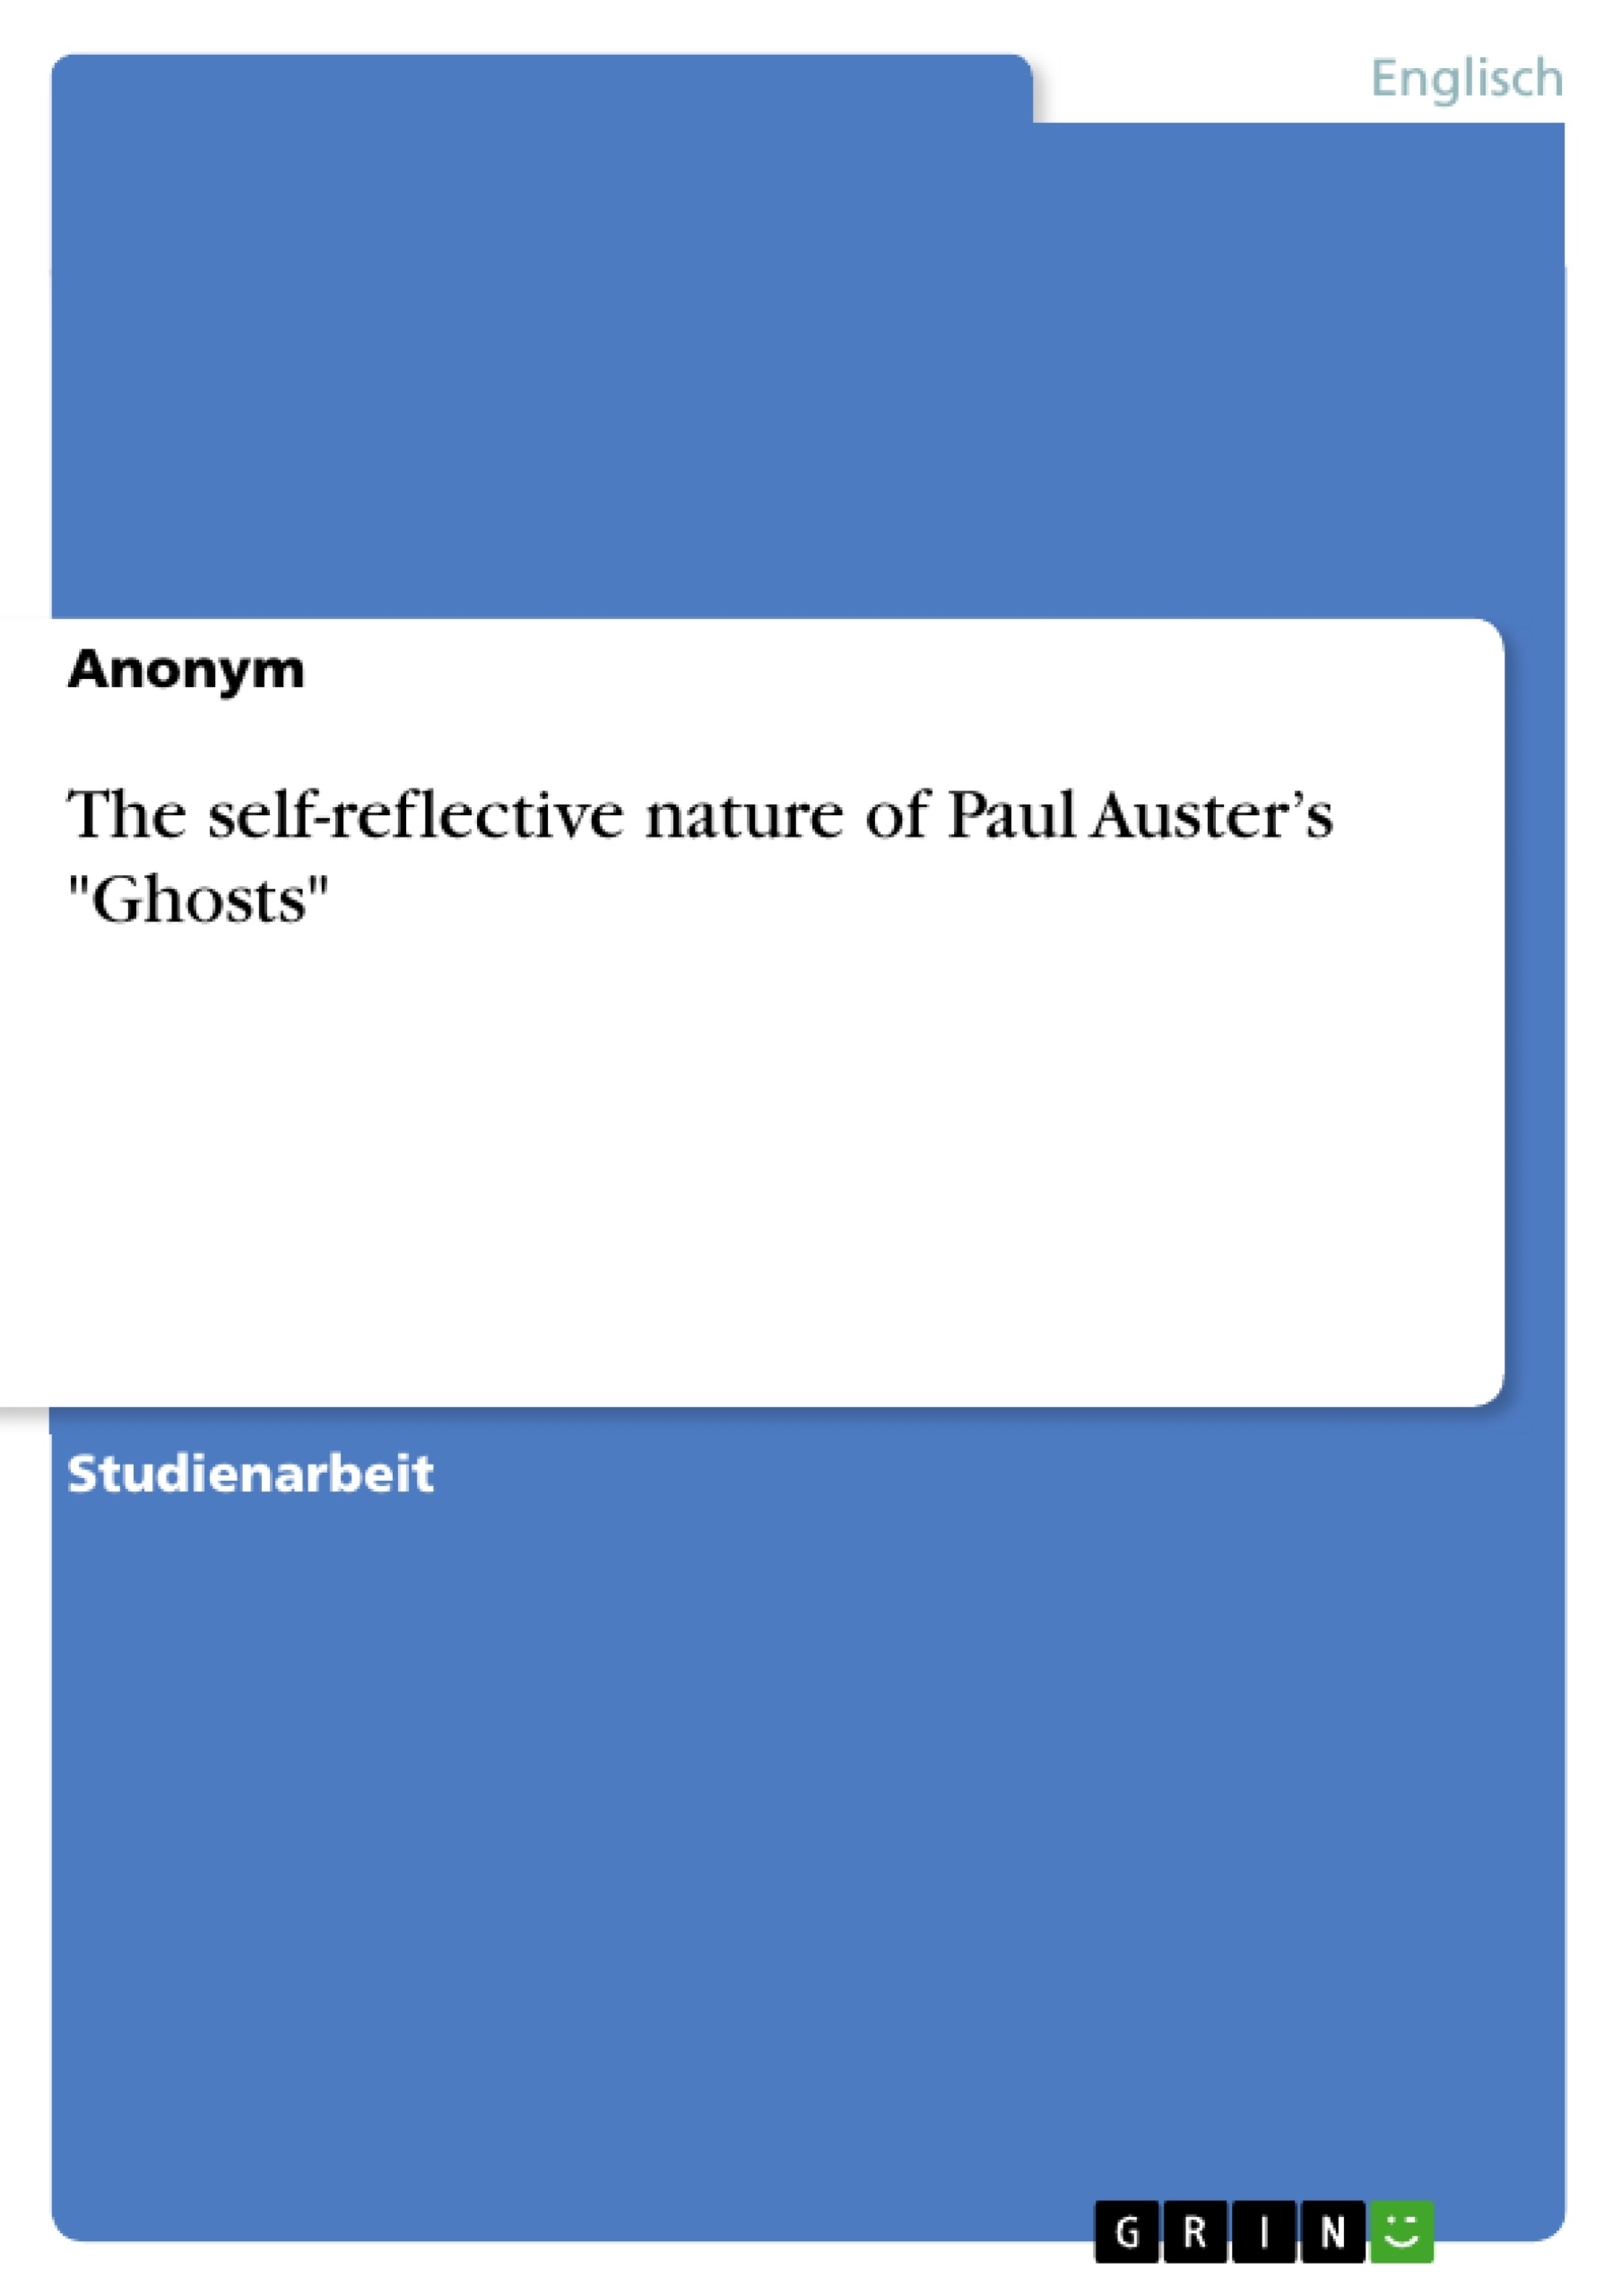 Título: The self-reflective nature of Paul Auster’s "Ghosts"